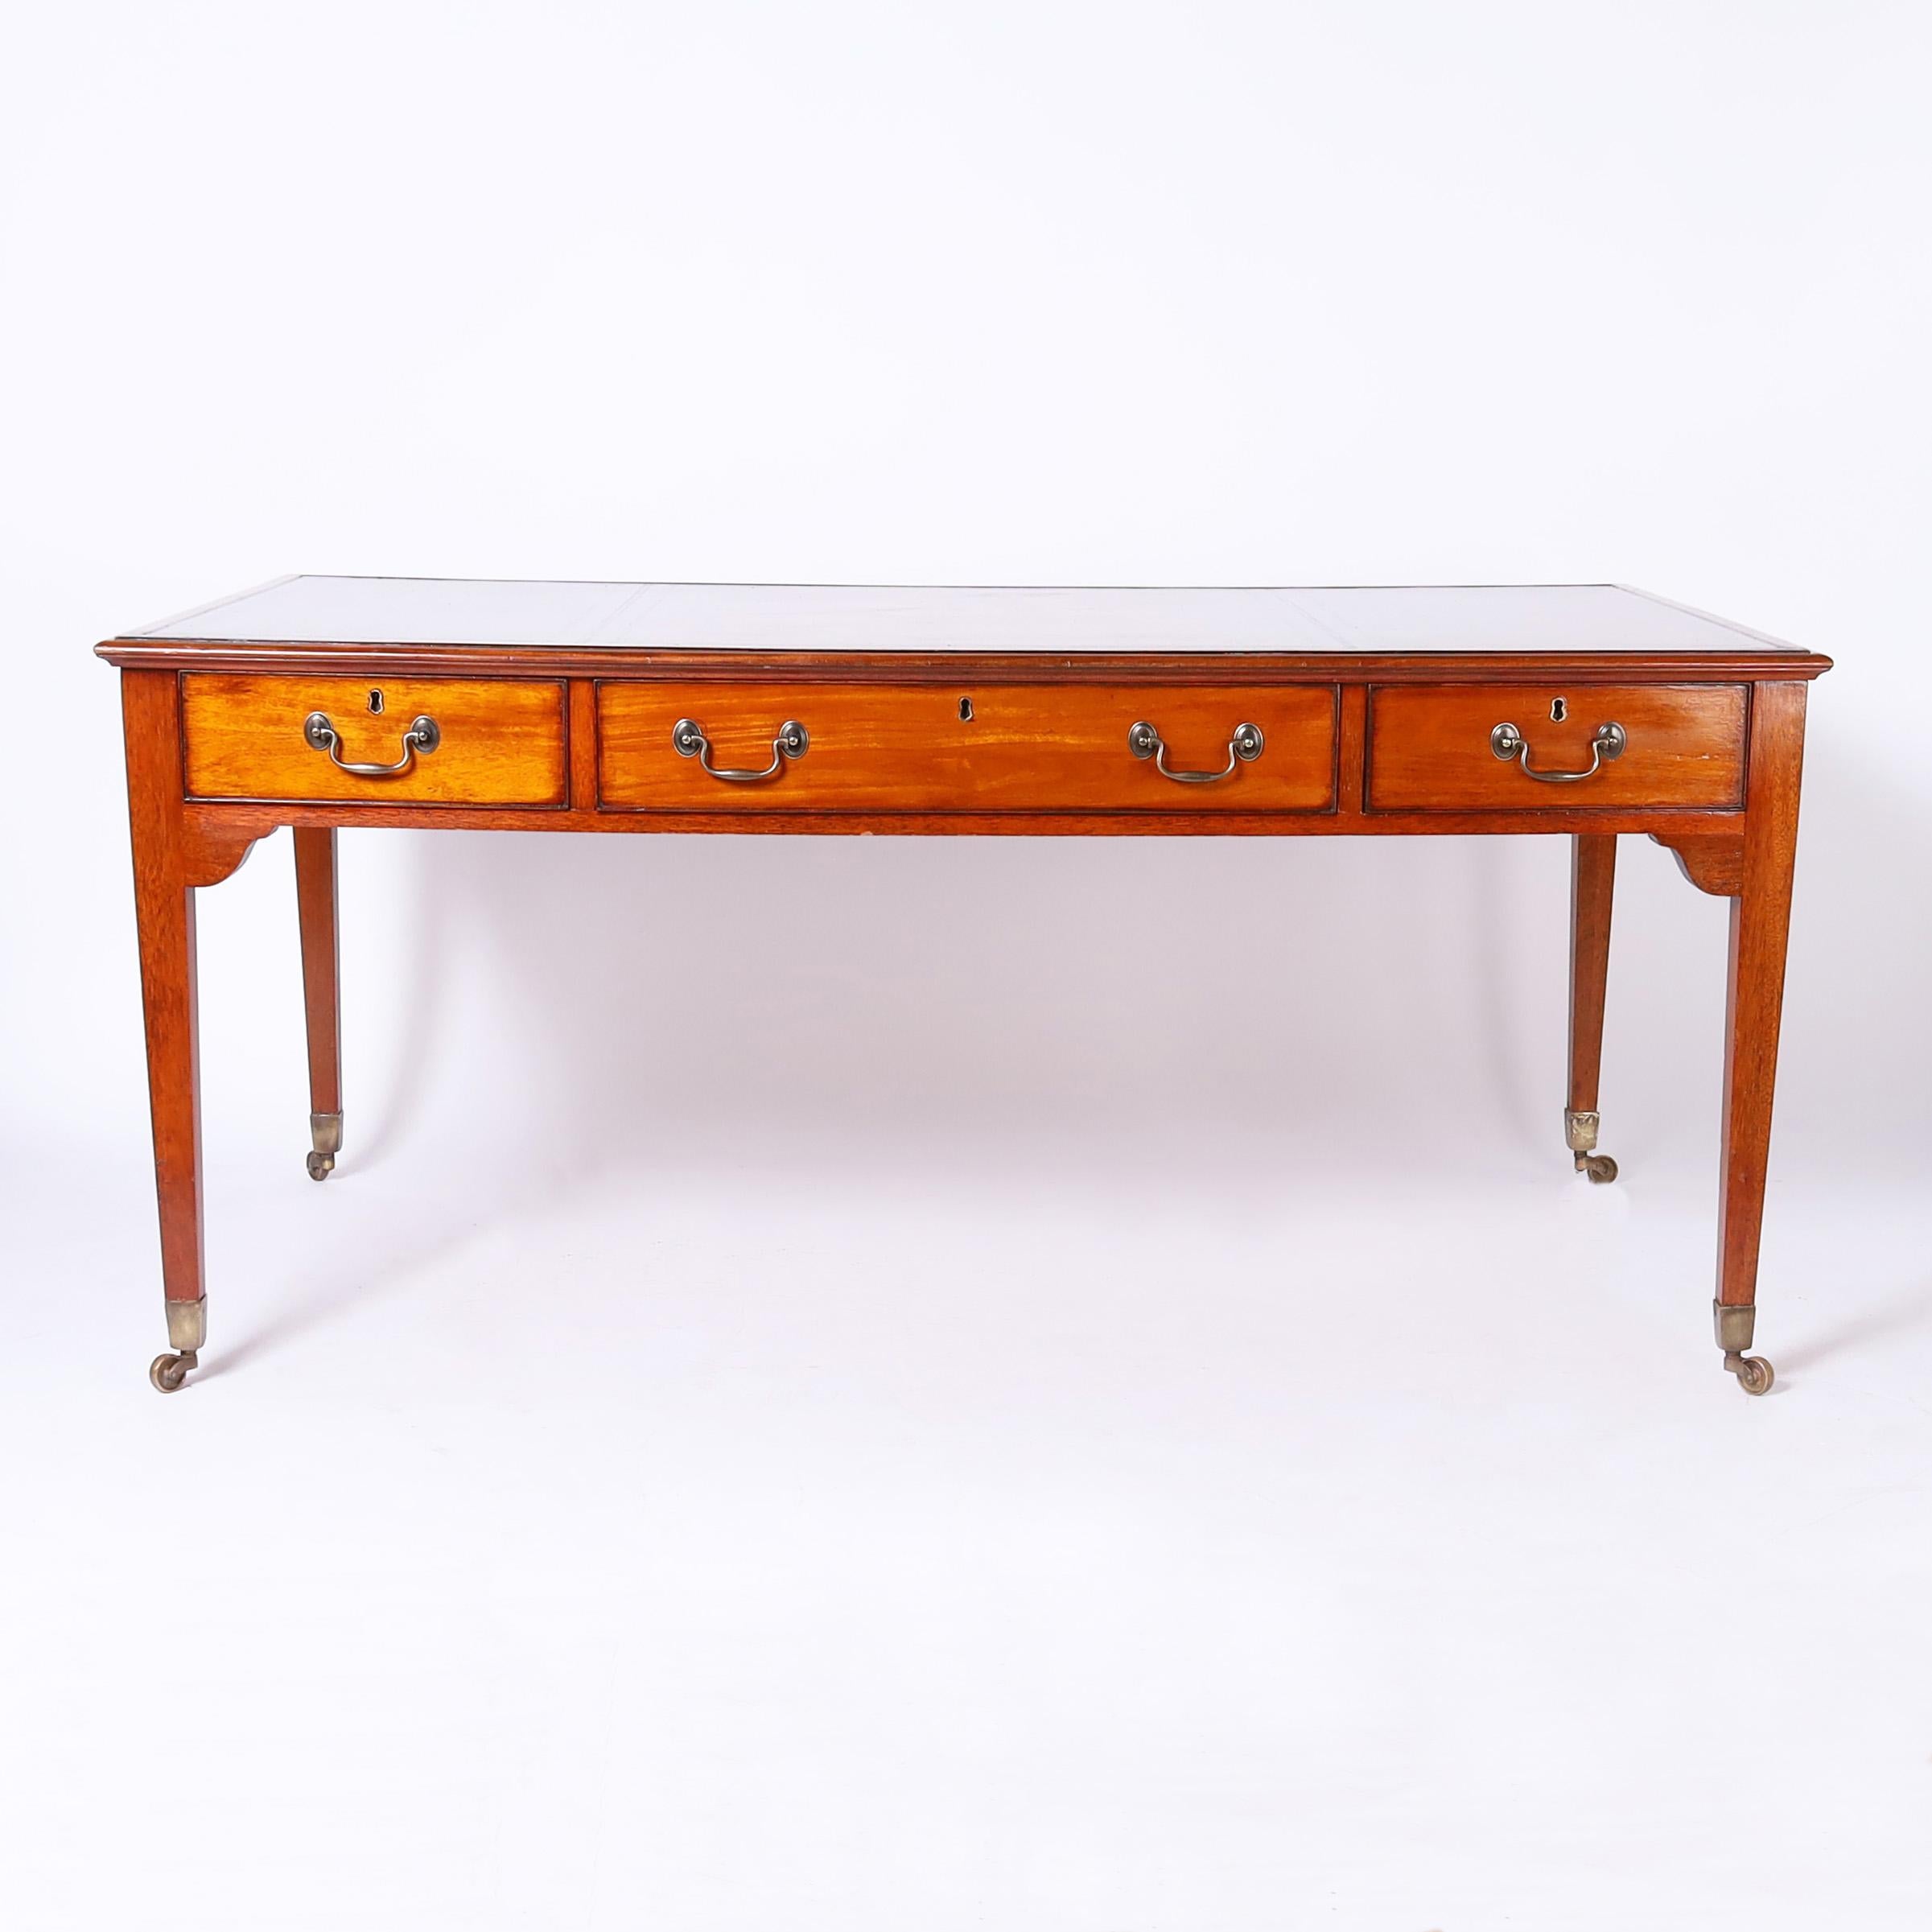 Handsome copy of Winston Churchill's George III style partners desk crafted in mahogany with a tooled leather top on a case with three drawers on either side supported by square tapered legs with brass casters. The original desk can be seen at the